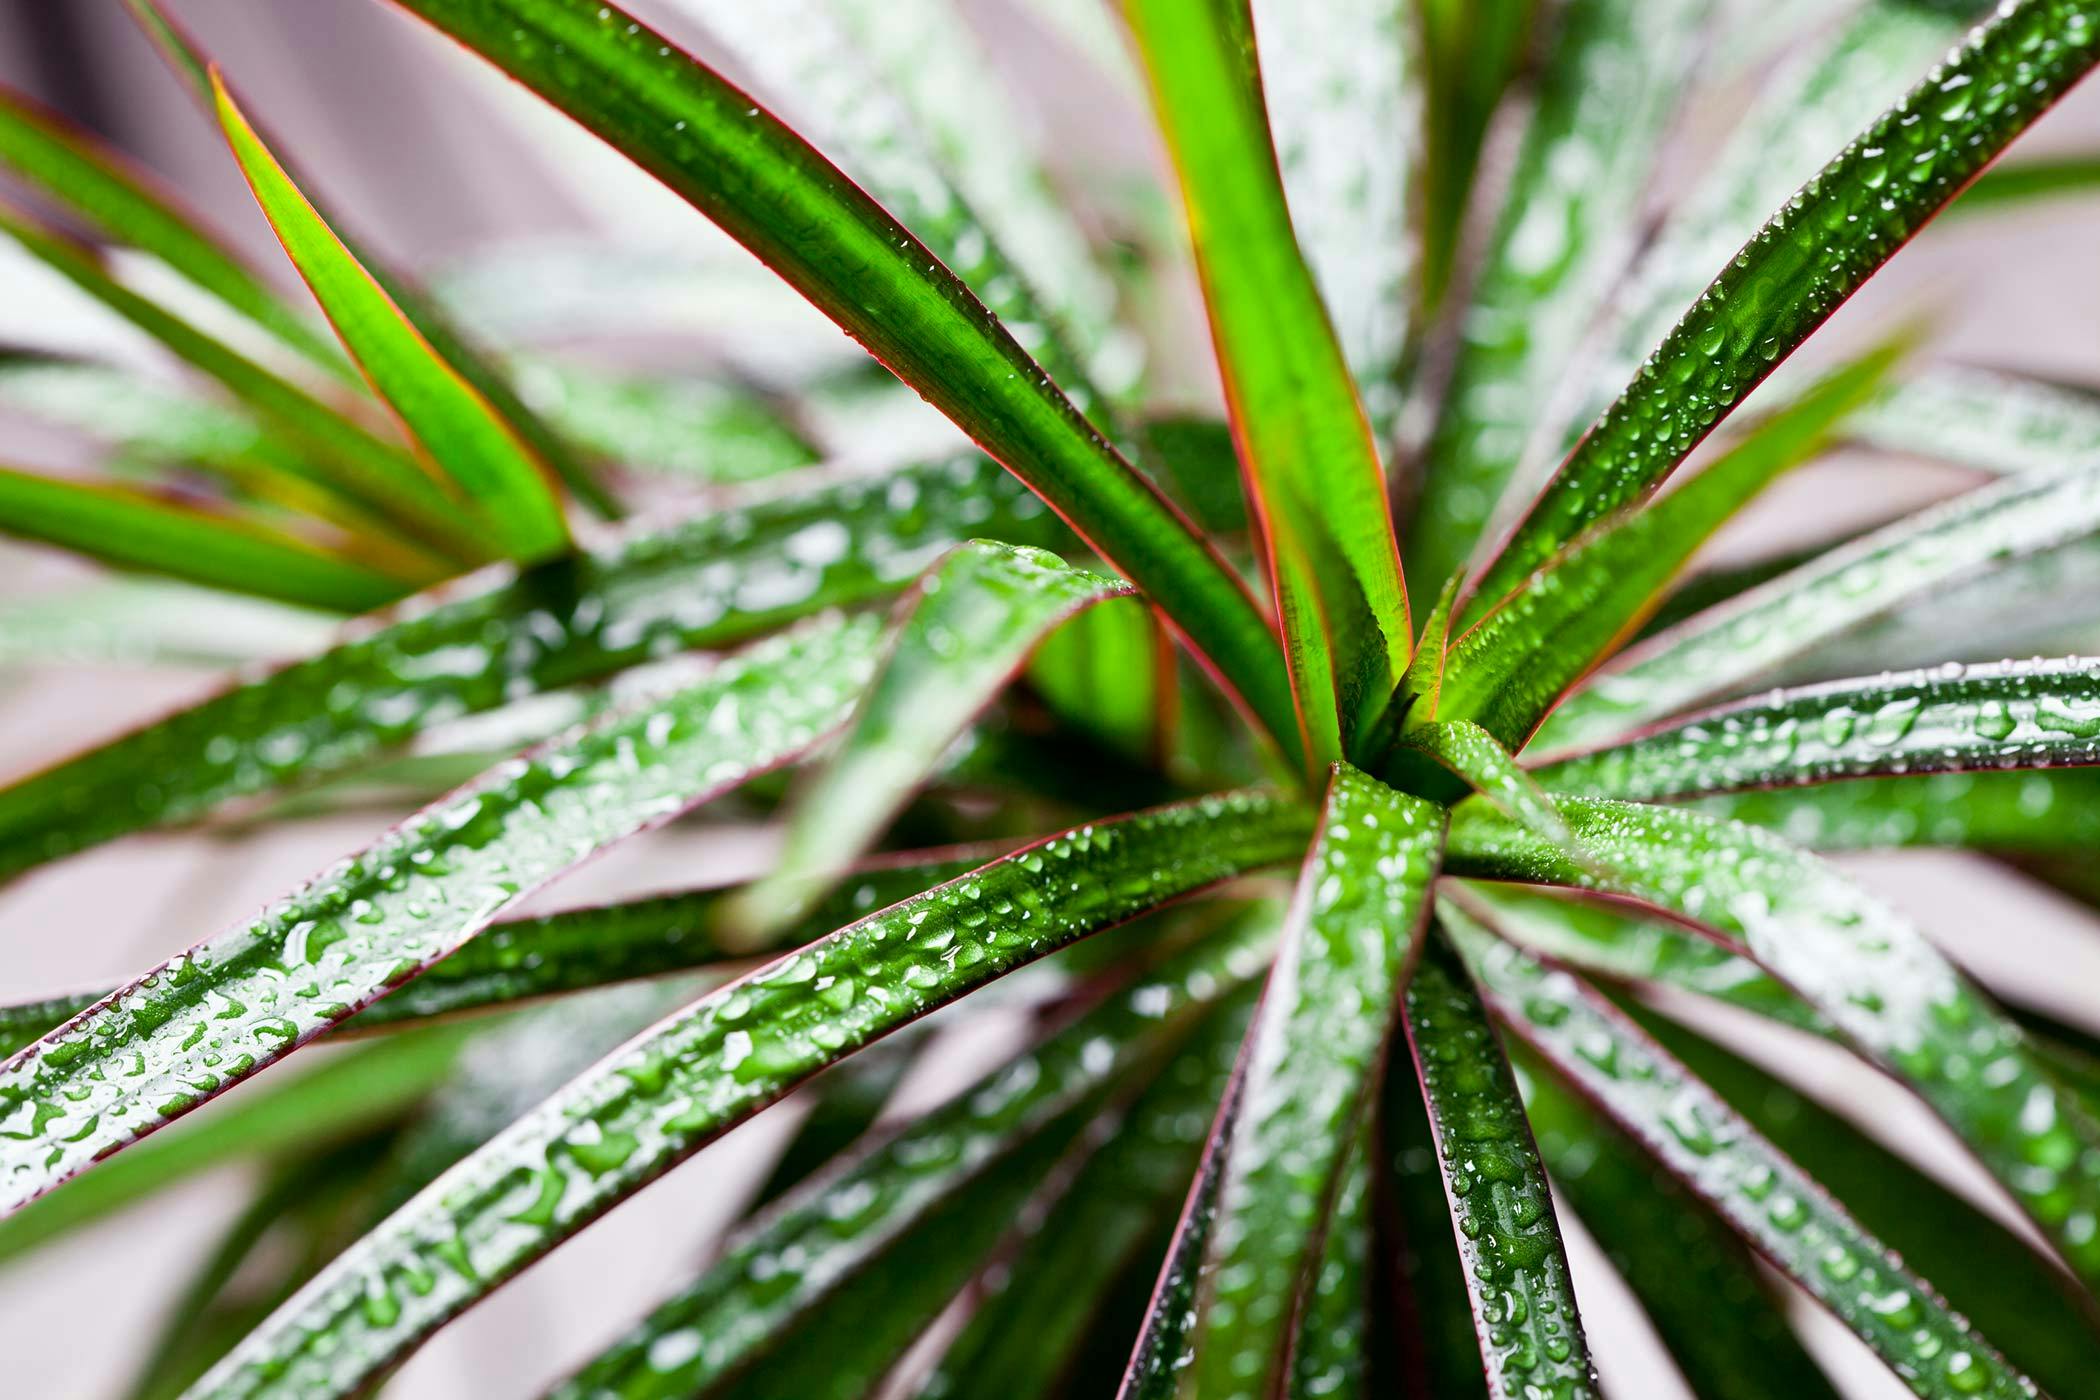 are dracaena plants poisonous to dogs